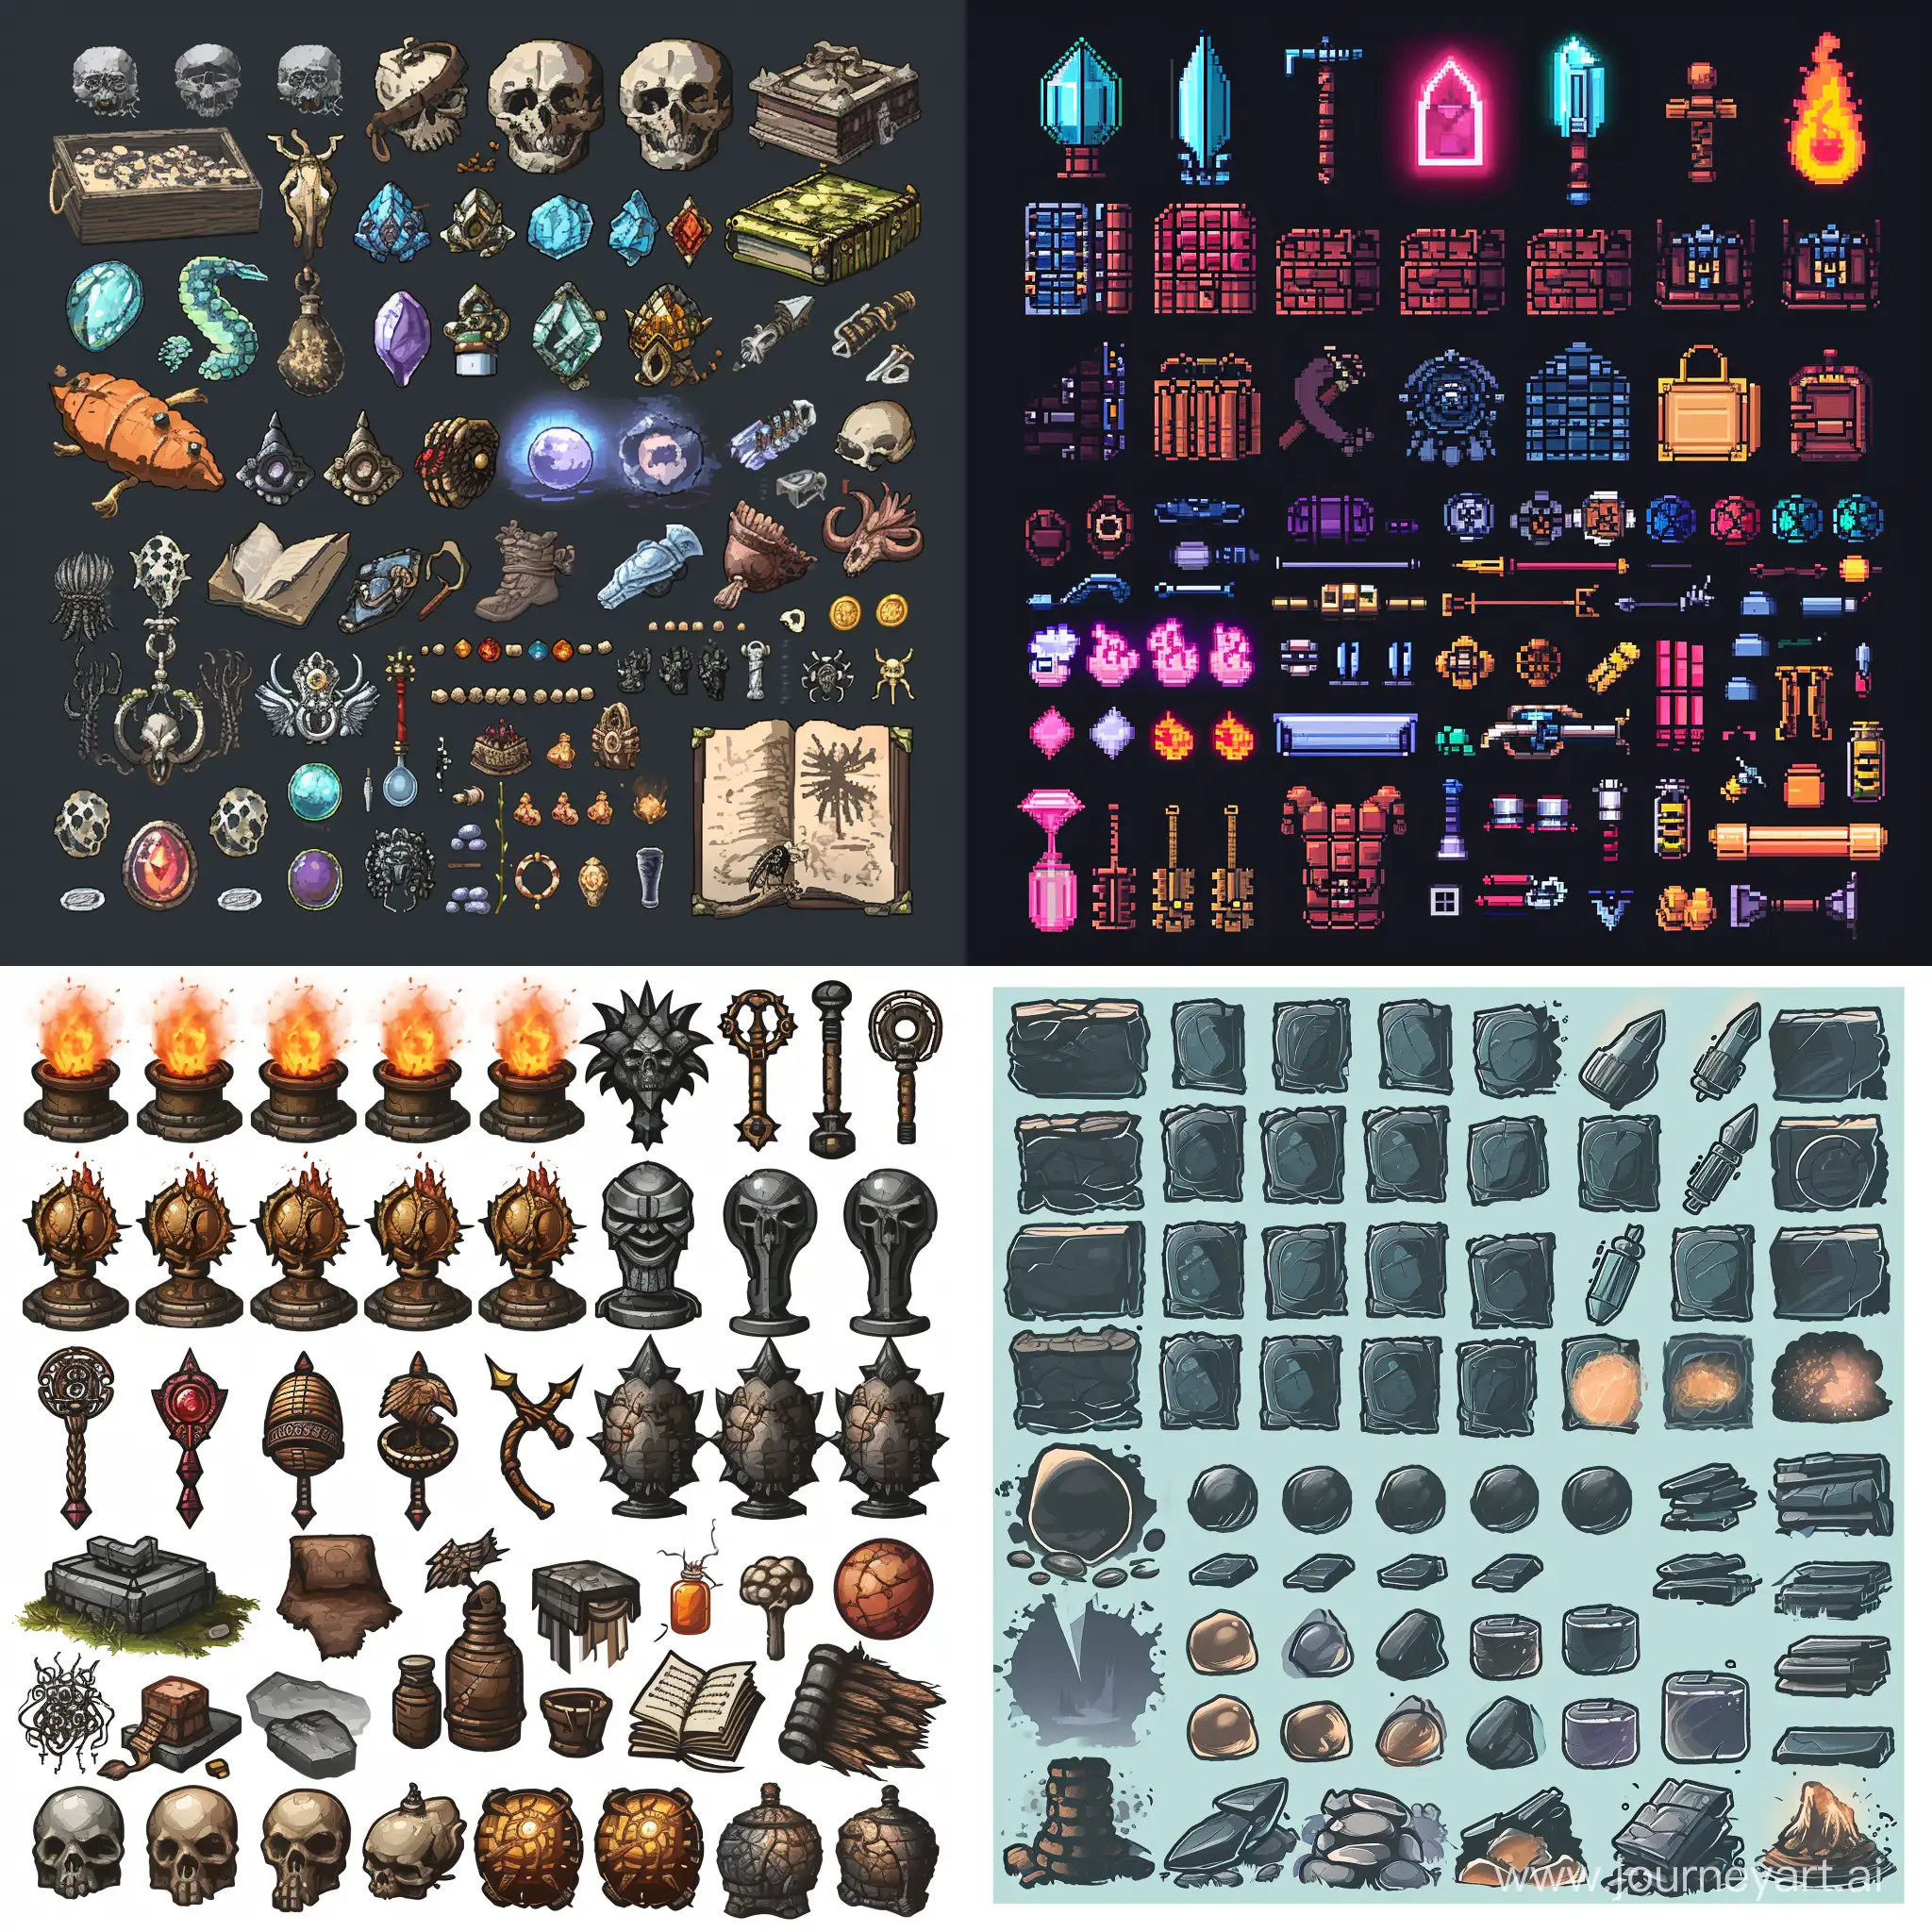 Colorful-Item-Spritesheet-with-Vibrant-Effects